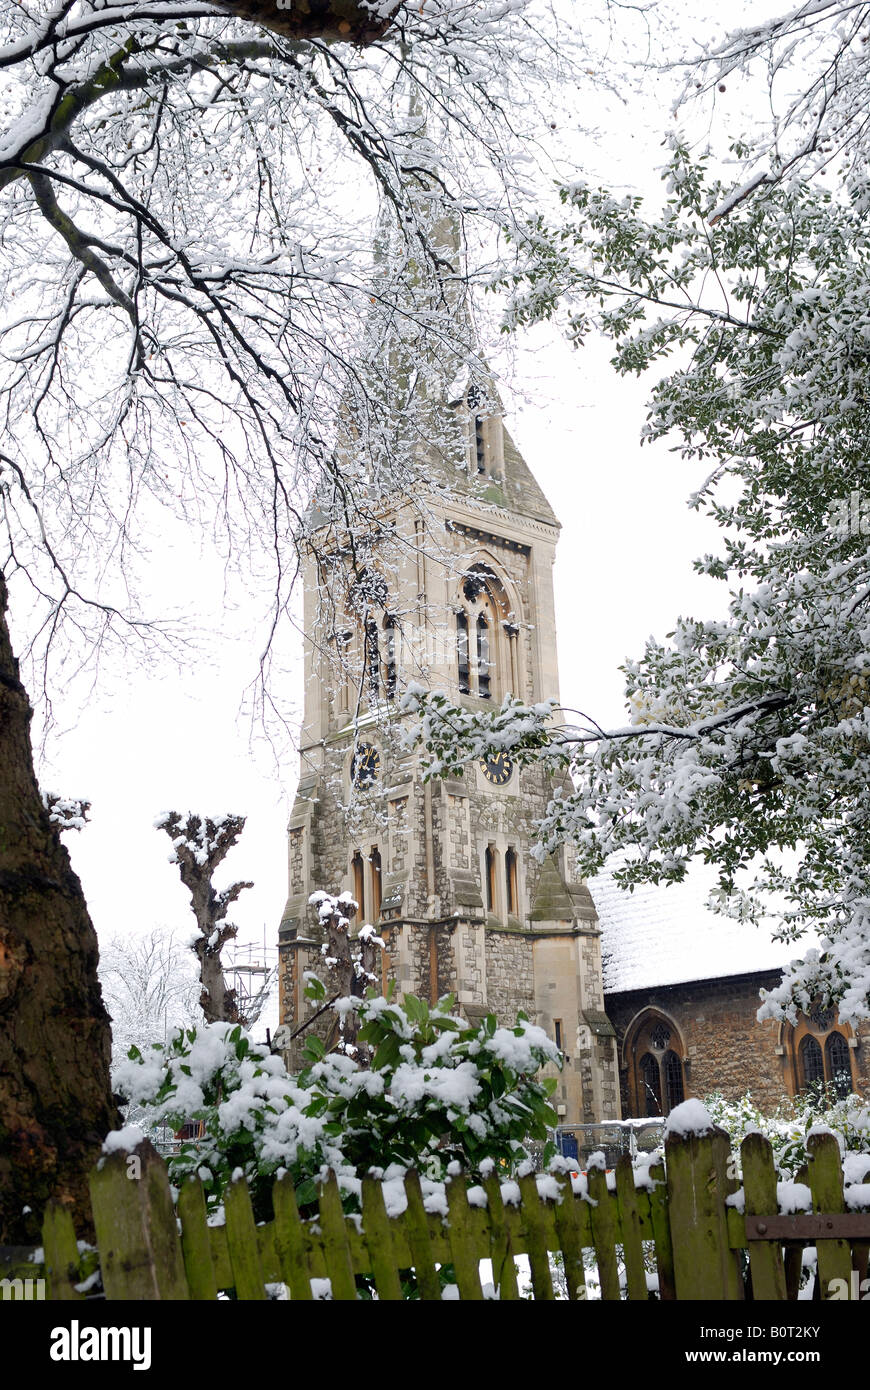 SNOW COVERED CHURCH Stock Photo